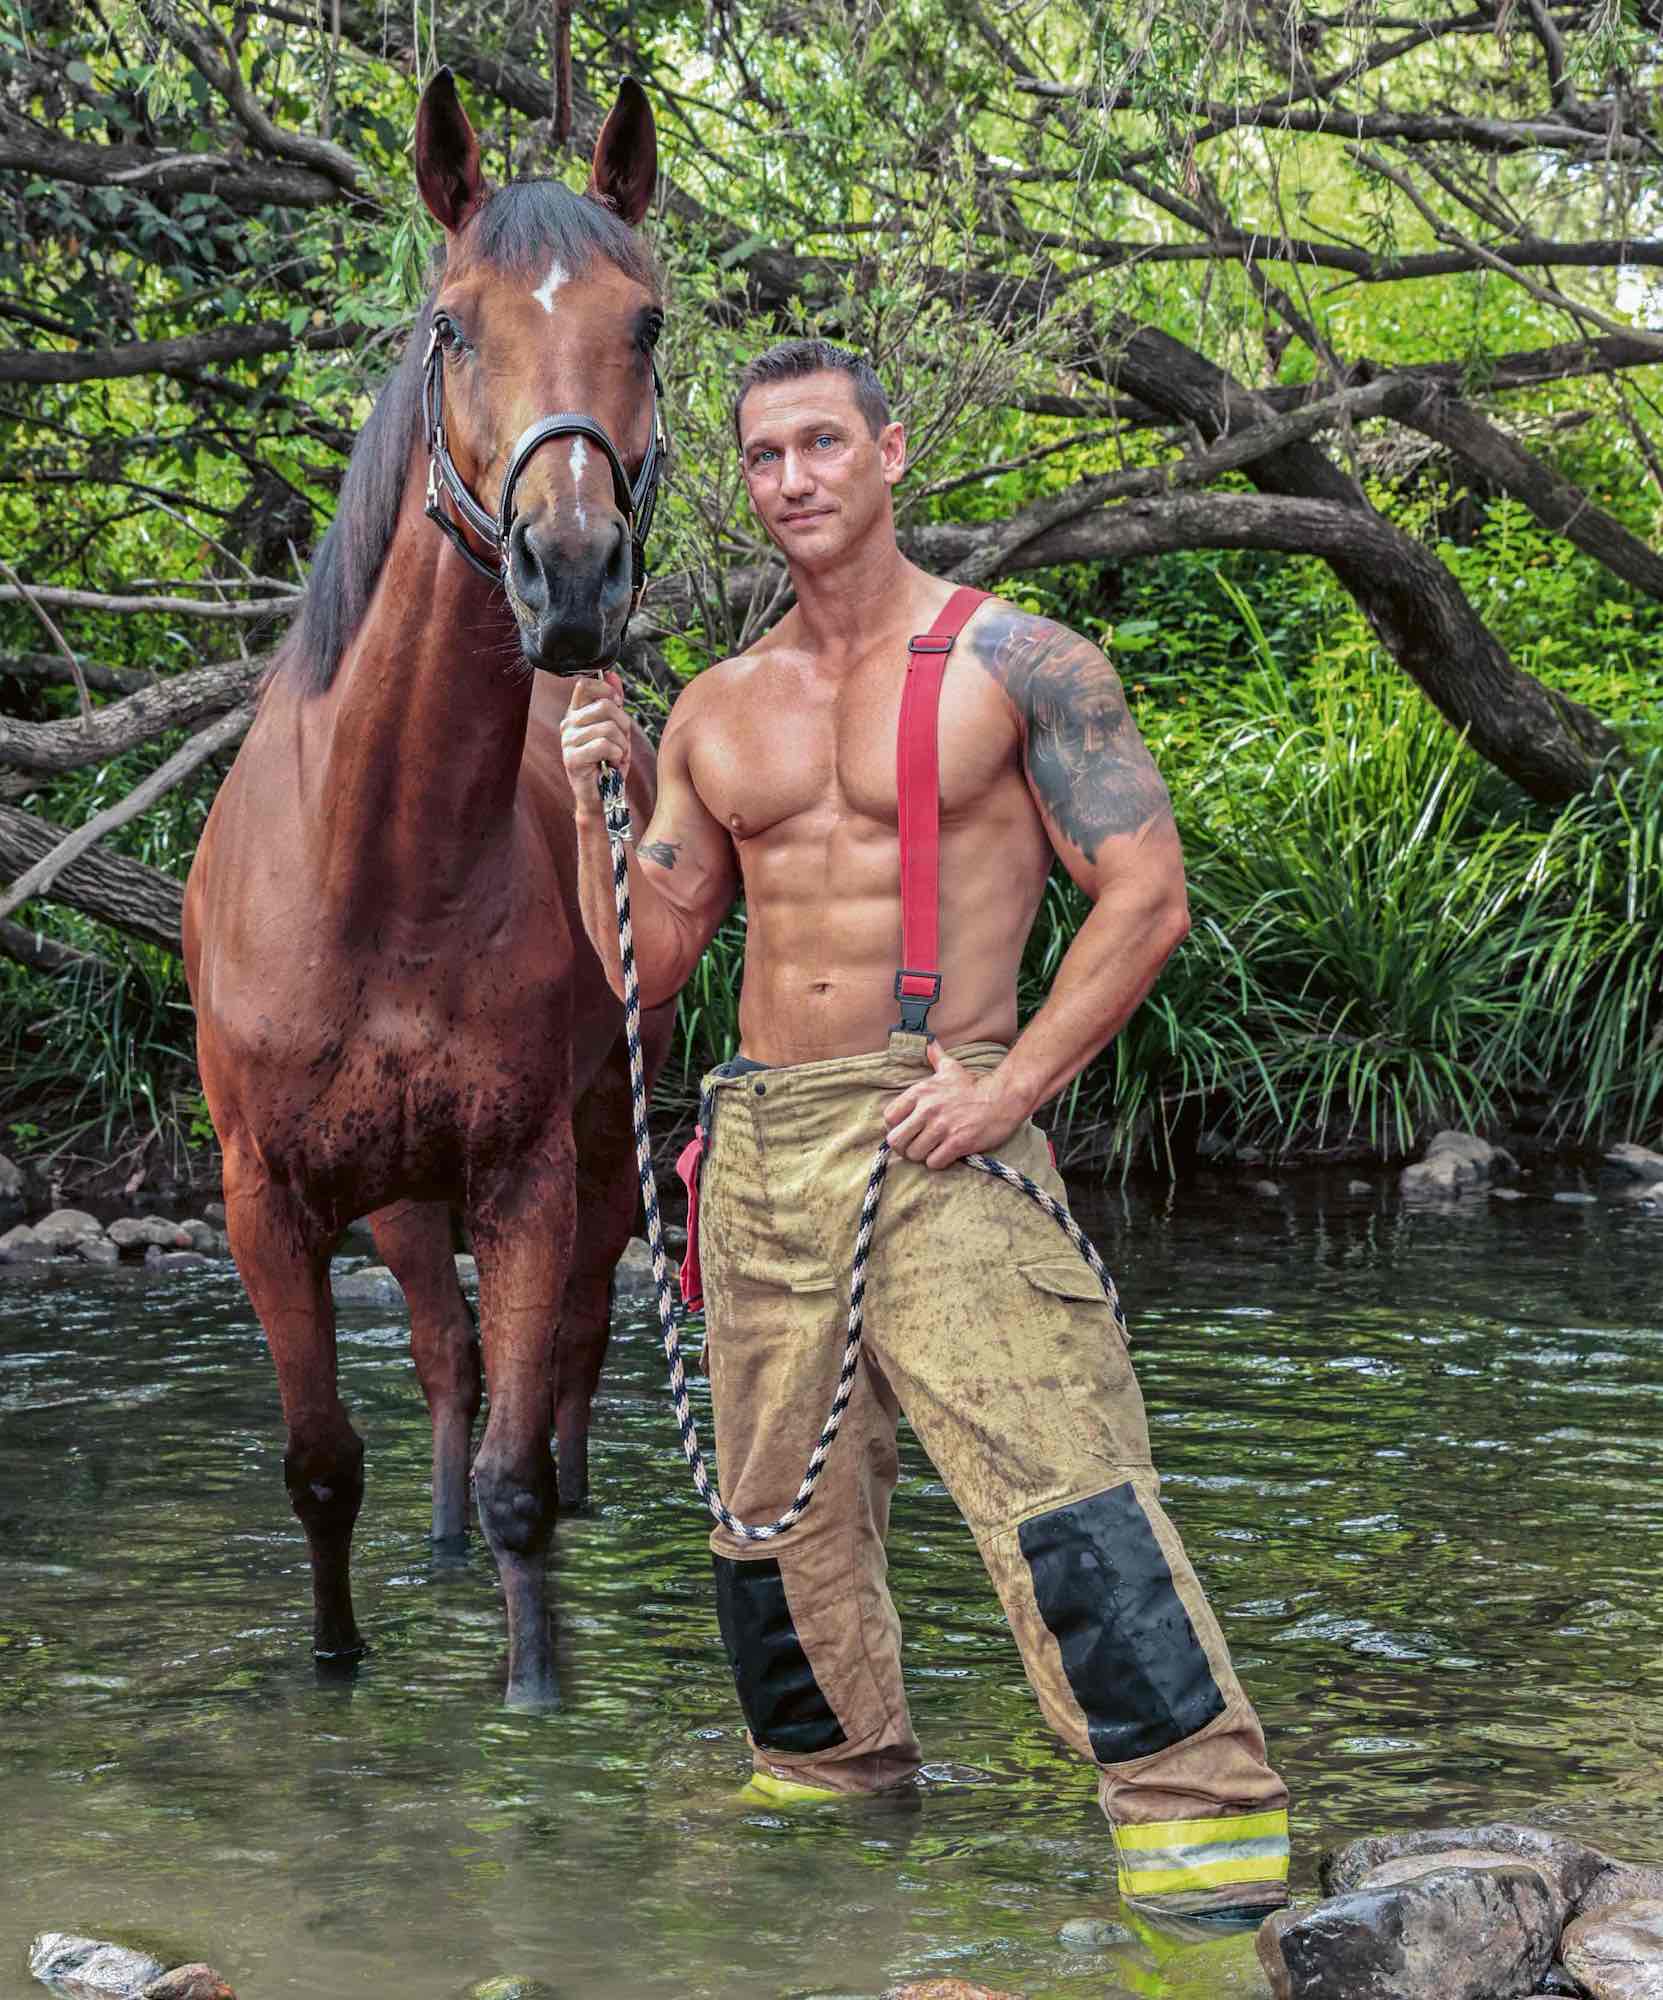 https://www.usmagazine.com/wp-content/uploads/2023/10/Australias-Firefighters-Are-Here-to-Rescue-Your-2024-With-an-All-New-Sexy-Calendar-Complete-With-Cute-Animals-8.jpg?quality=86&strip=all